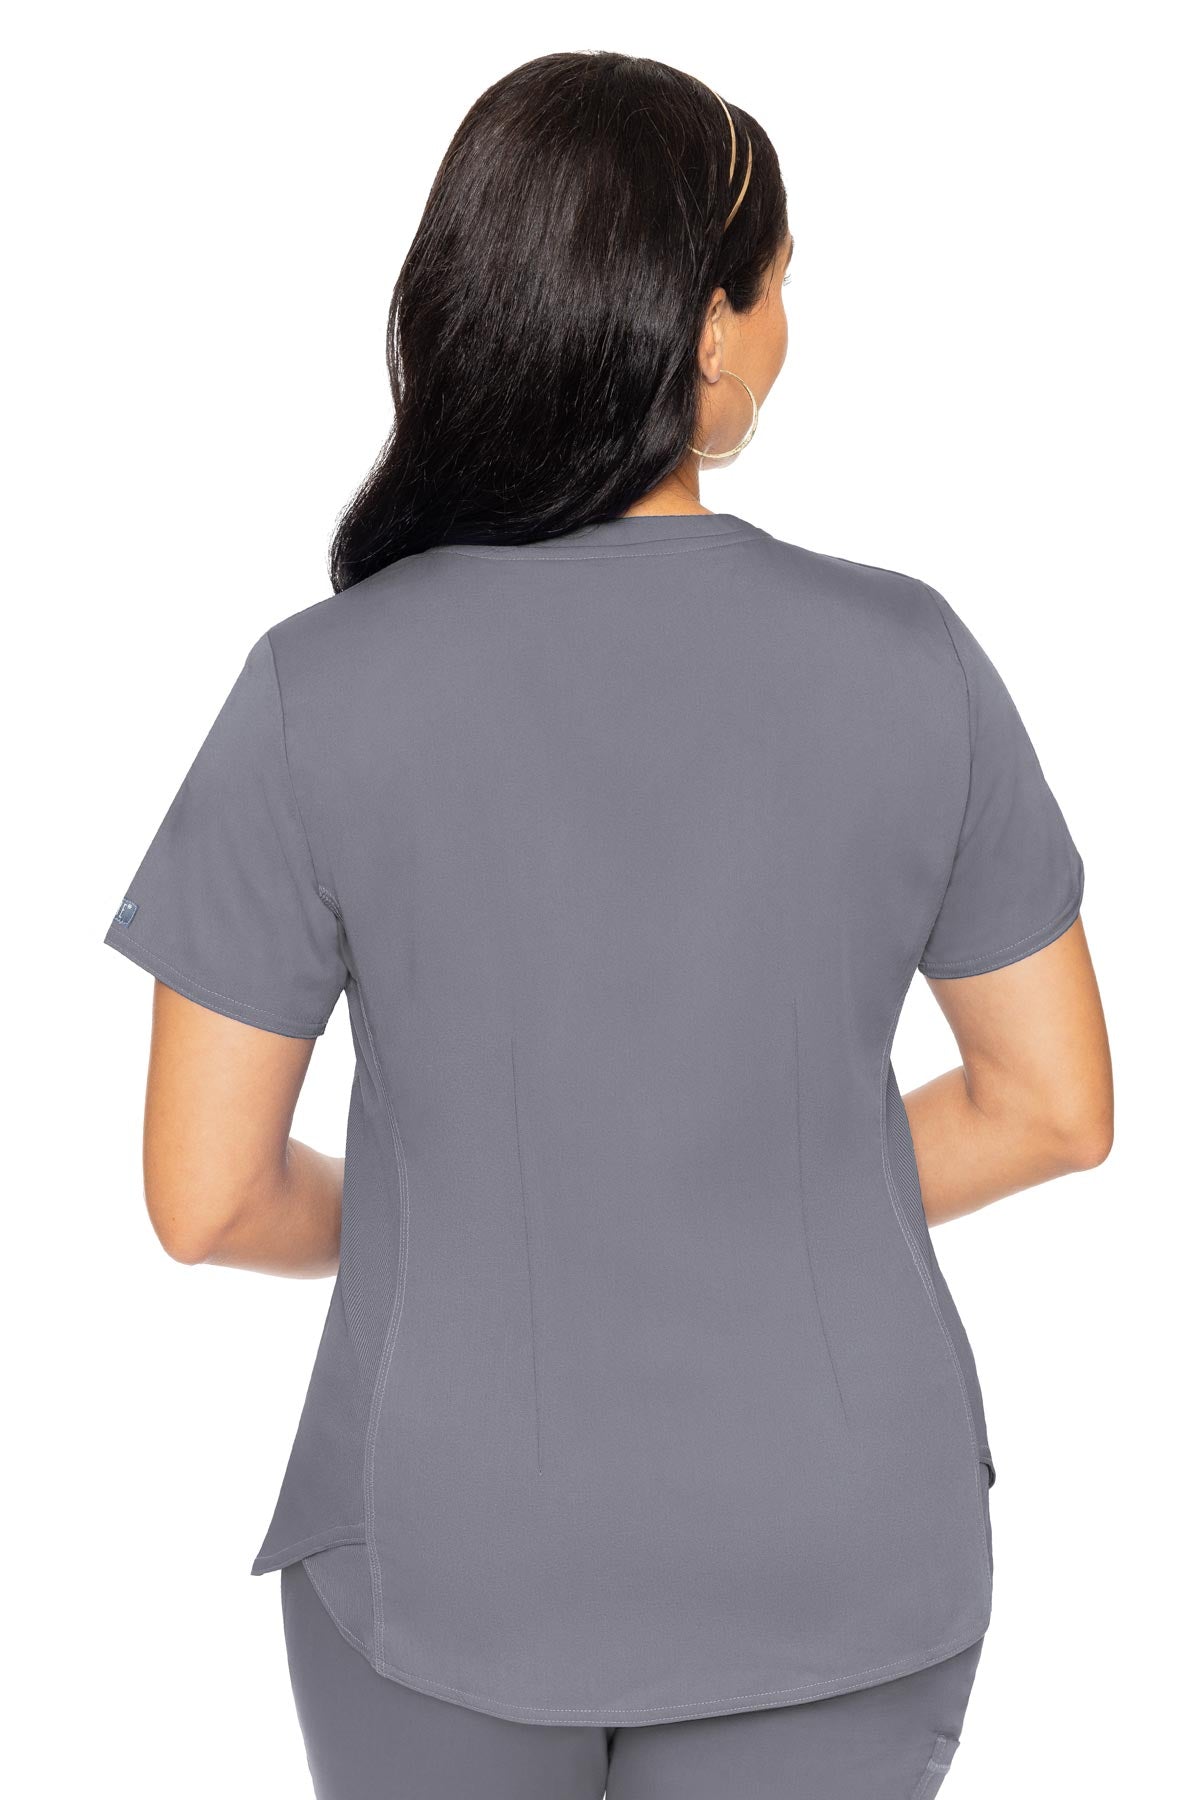 Med Couture V-Neck Shirttail Racerback Top XS-3XL / Cloud